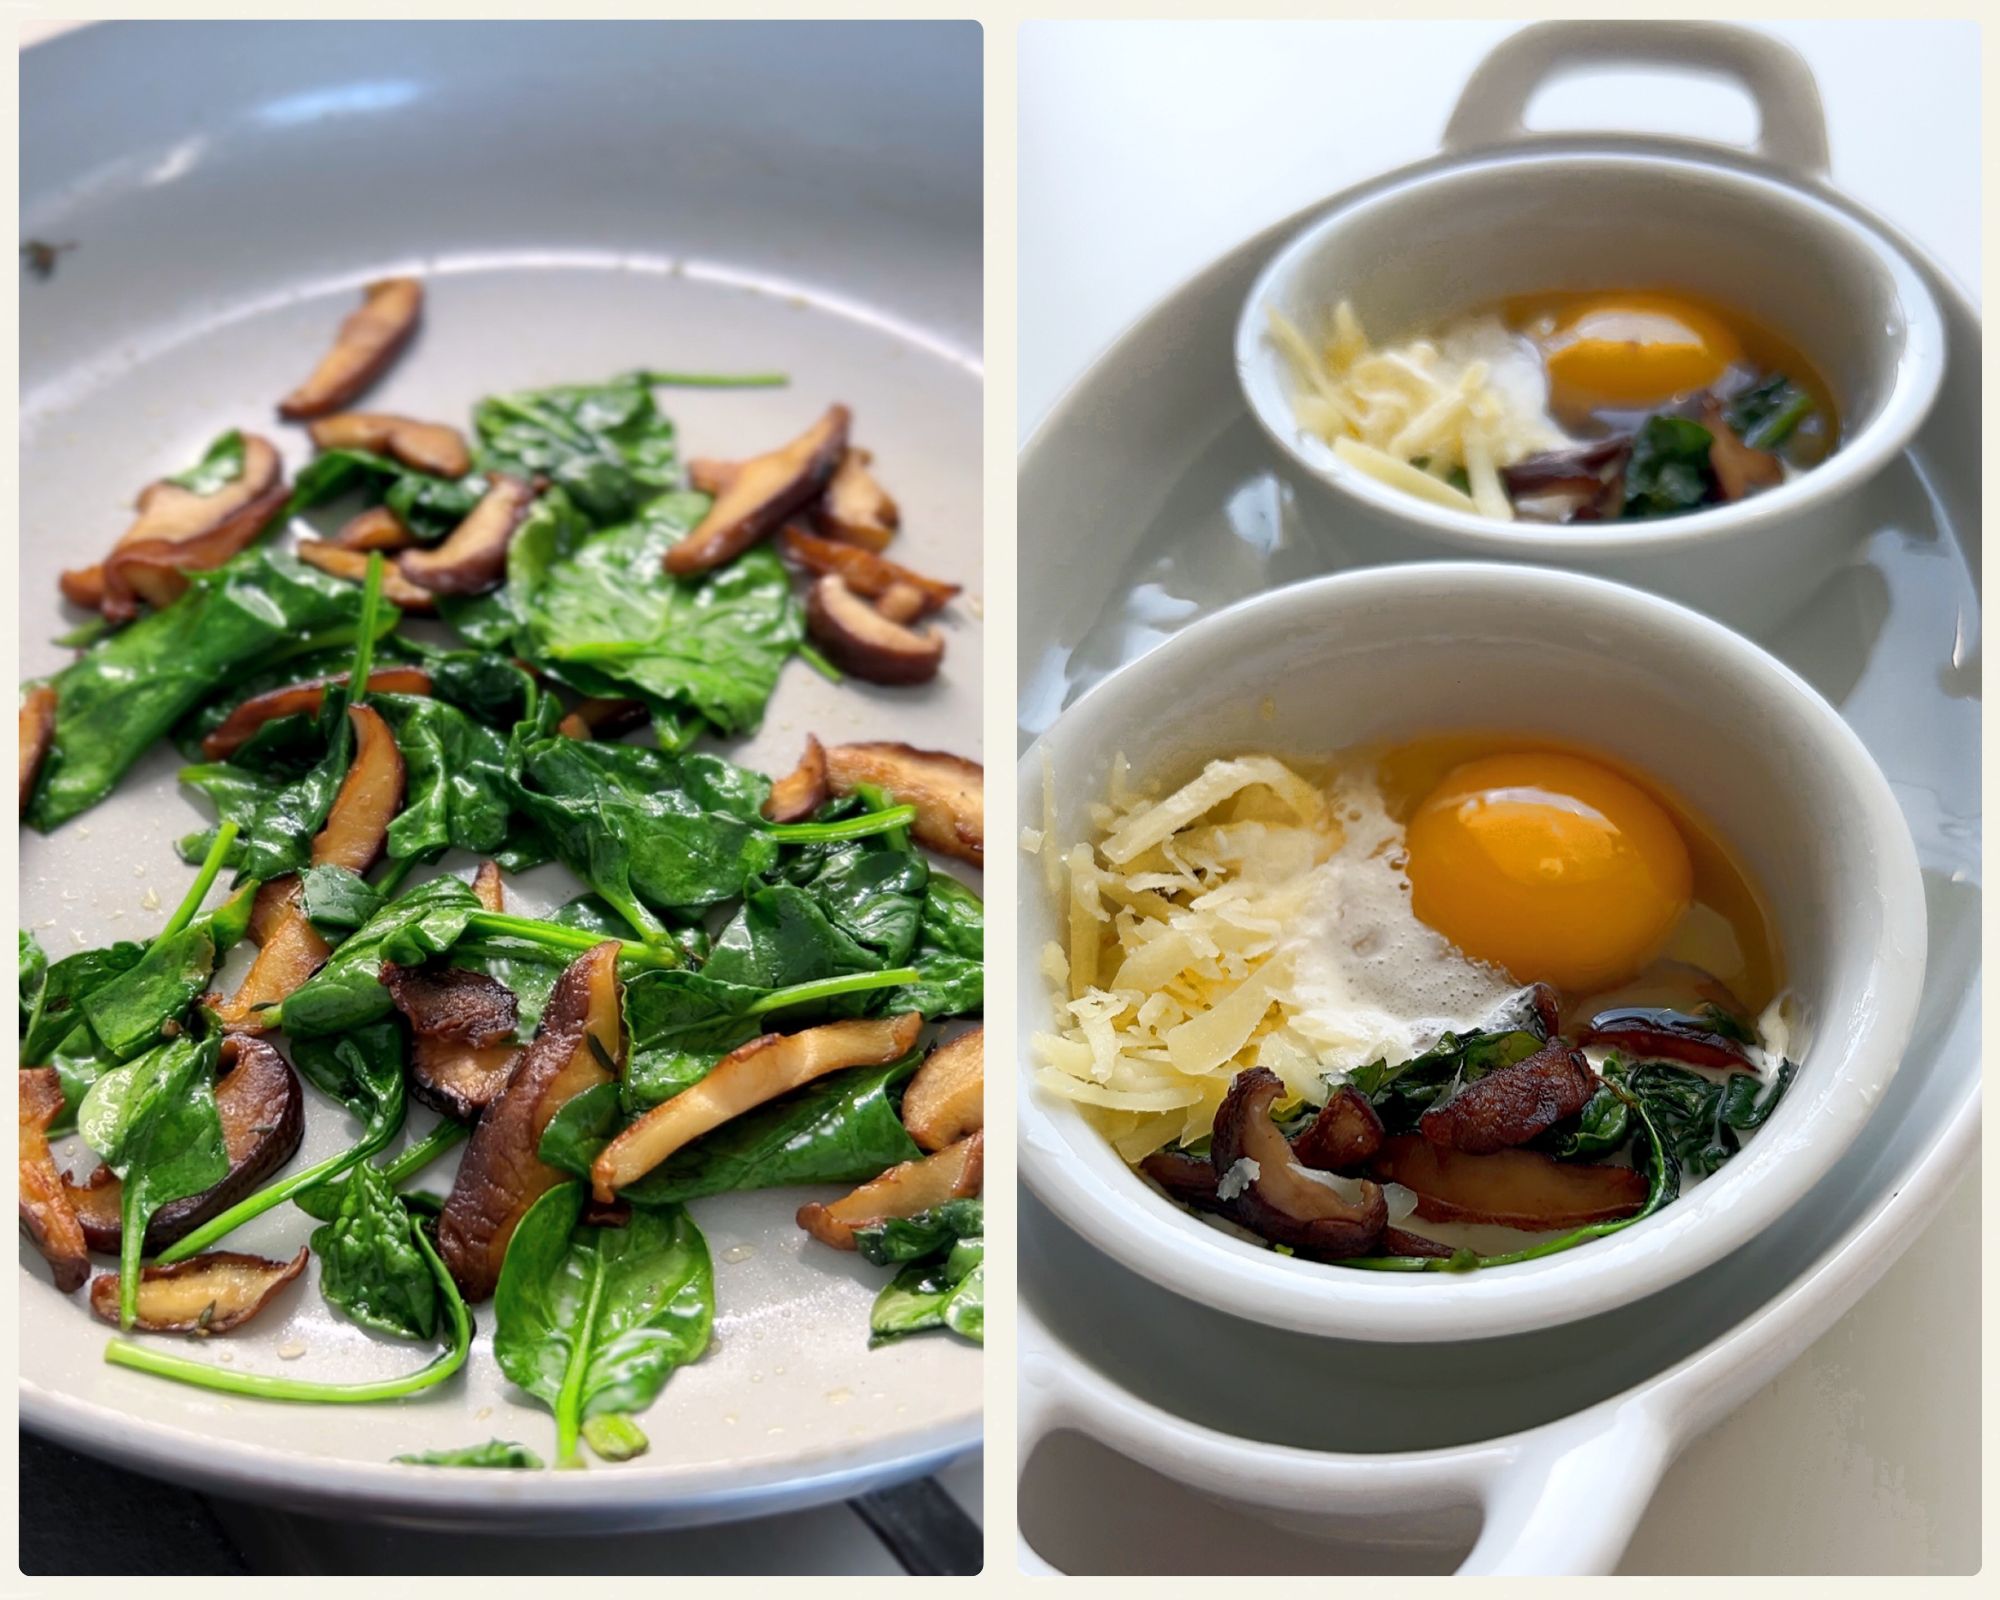 Two images, the left featuring a plate with sauteed spinach and mushrooms, and the right featuring small bowls with eggs, cheese and the spinach-mushroom mixture.